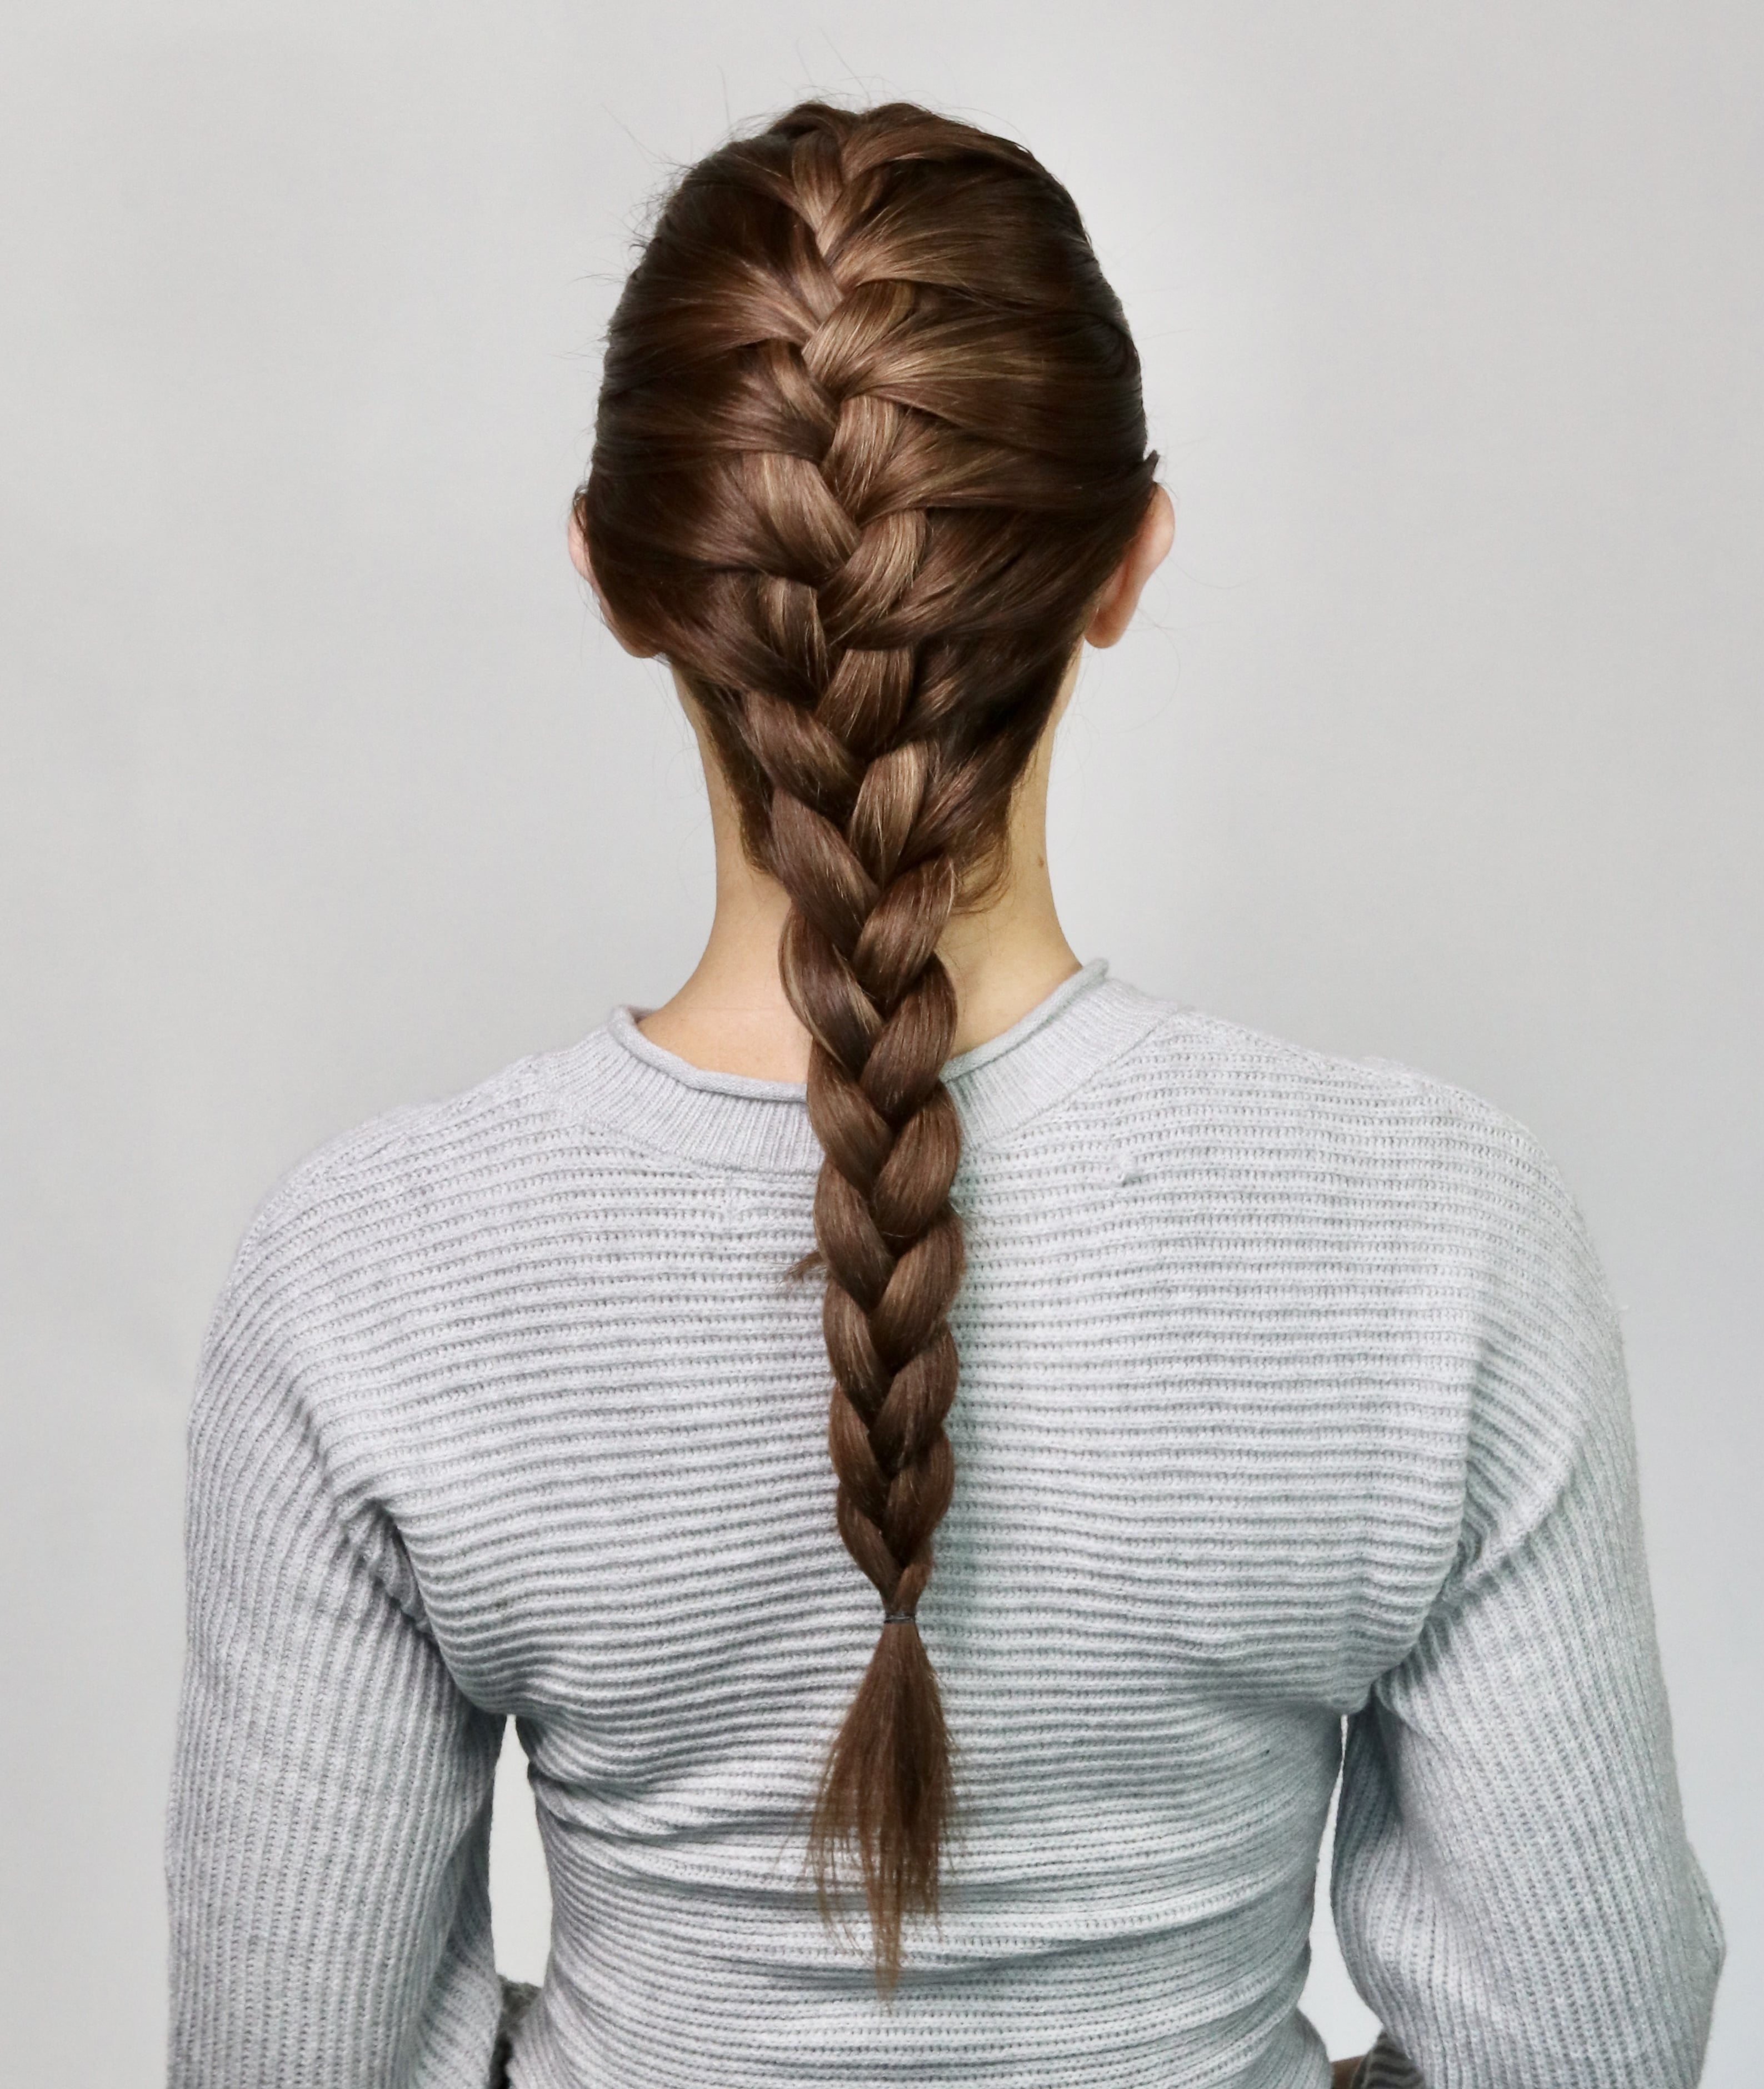 Braided Hairstyles For Mixed Hair: Tutorial For French Braid